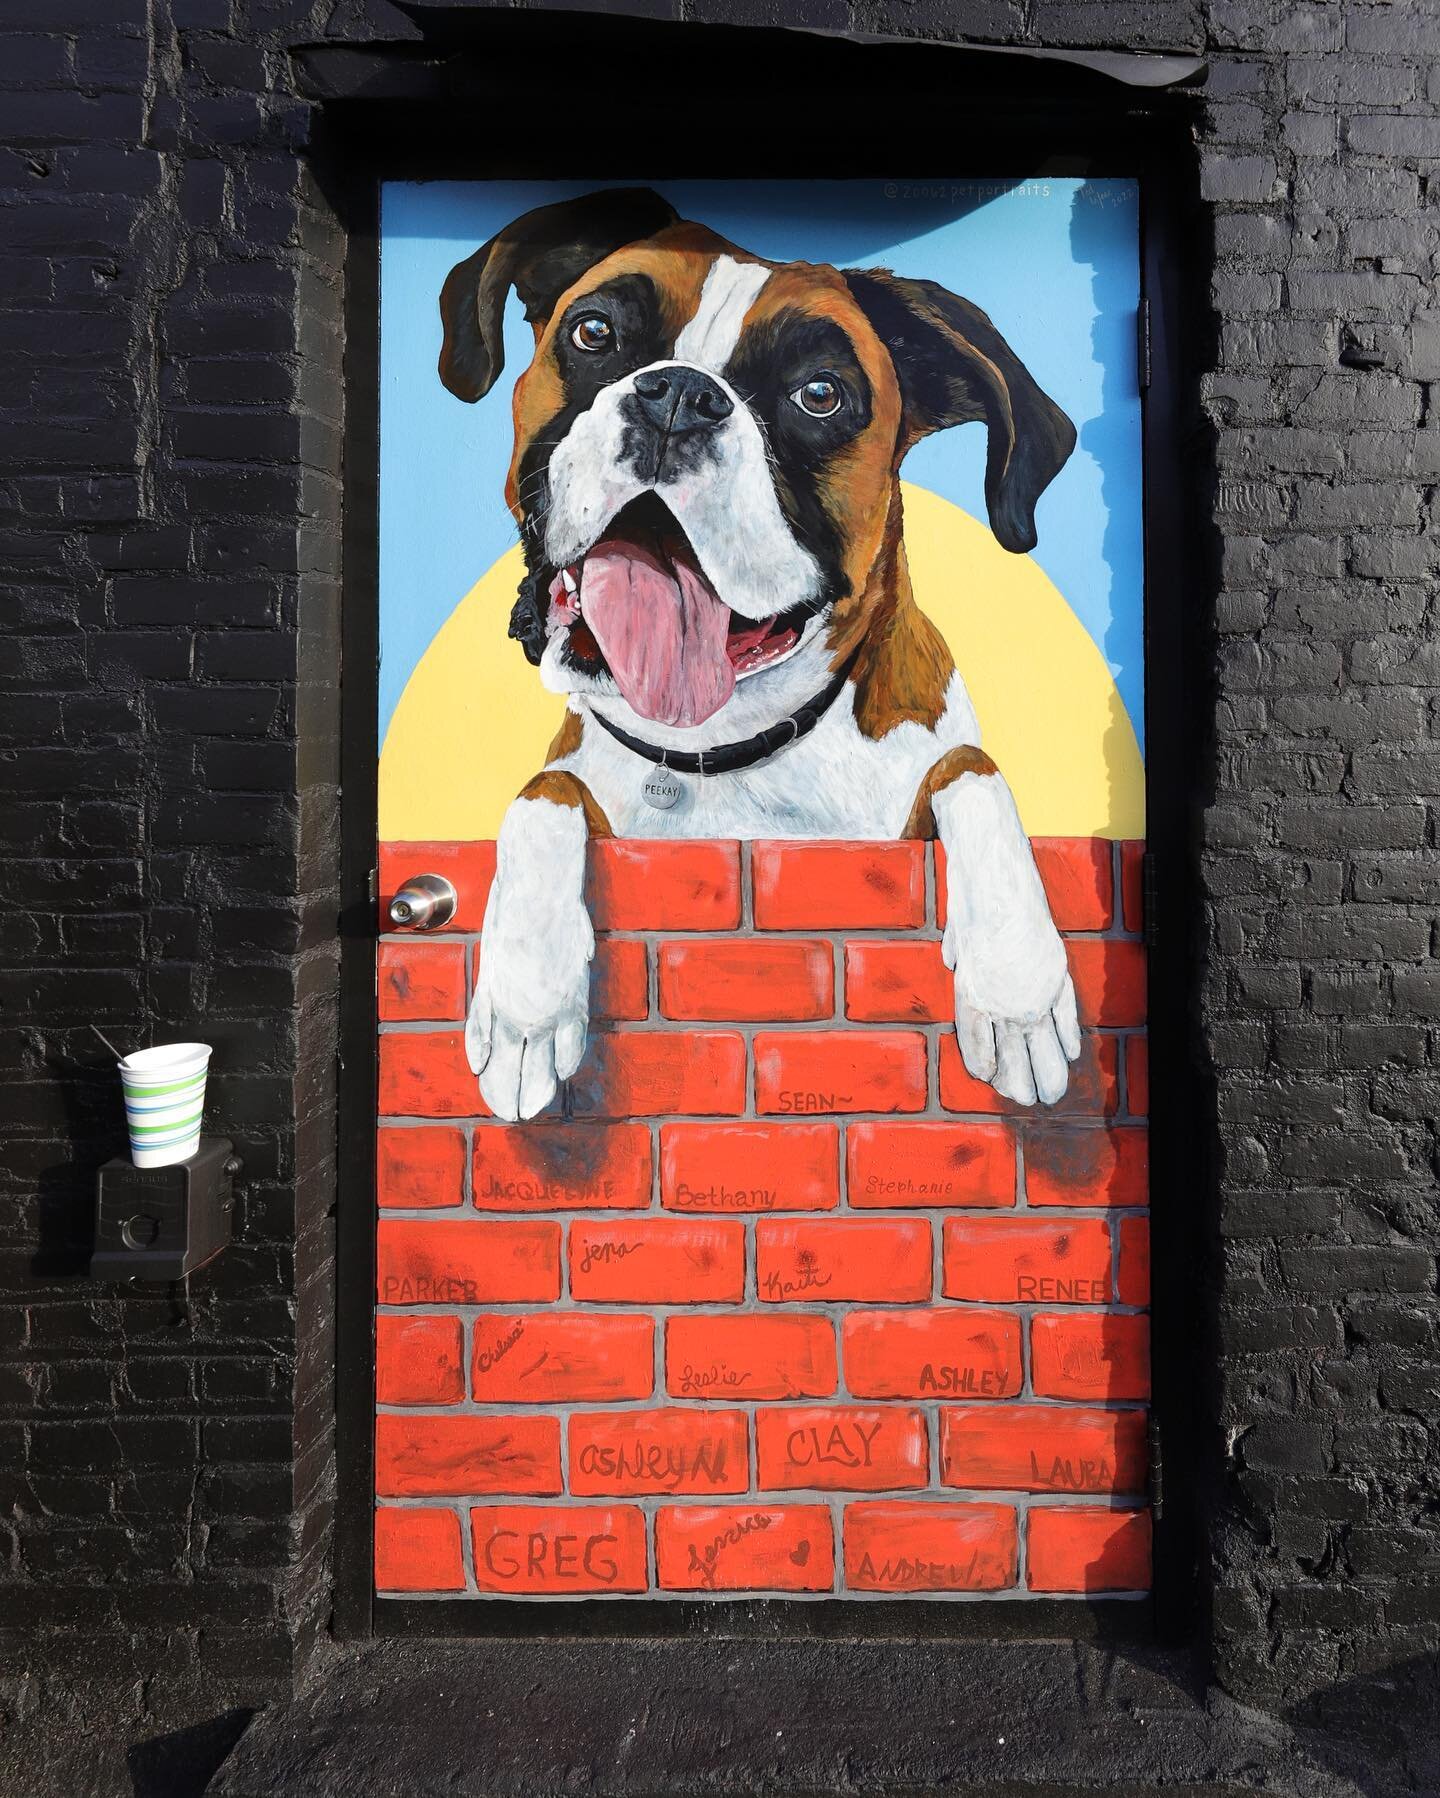 Final Mural by @zoo62petportraits for #BrightWallsJackson 2022

📍111 E. Michigan Avenue, Jackson, MI 49201 USA

Ted Lefere has a gift when it comes to painting friendly faces we all know and love! 🐶 And he has a way of incorporating a lot of meanin